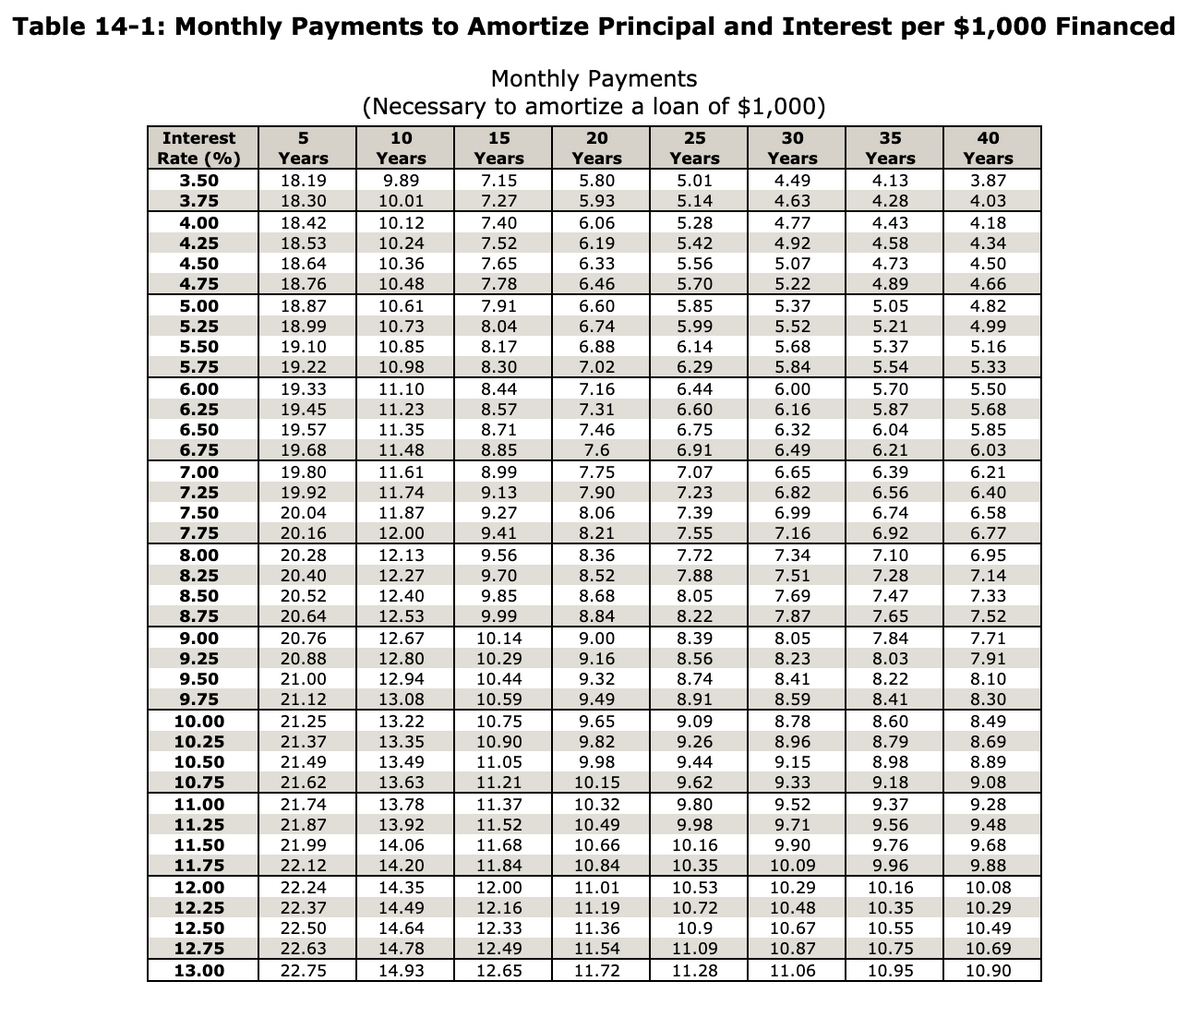 Table 14-1: Monthly Payments to Amortize Principal and Interest per $1,000 Financed
Monthly Payments
(Necessary to amortize a loan of $1,000)
Interest
5
10
15
20
25
30
35
40
Rate (%)
Years
Years
Years
Years
Years
Years
Years
Years
3.50
18.19
9.89
7.15
5.80
5.01
4.49
4.13
3.87
3.75
18.30
10.01
7.27
5.93
5.14
4.63
4.28
4.03
6.06
6.19
4.77
4.00
4.25
5.28
5.42
18.42
10.12
7.40
7.52
4.43
4.58
4.18
18.53
10.24
4.92
4.34
4.50
18.64
10.36
7.65
6.33
5.56
5.07
4.73
4.50
4.75
18.76
10.48
7.78
6.46
5.70
5.22
4.89
4.66
5.00
18.87
10.61
7.91
6.60
5.85
5.37
5.05
4.82
8.04
8.17
5.25
18.99
10.73
6.74
5.99
5.52
5.21
4.99
5.50
19.10
10.85
6.88
6.14
5.68
5.37
5.16
5.75
19.22
10.98
8.30
7.02
6.29
5.84
5.54
5.33
6.00
19.33
11.10
8.44
7.16
6.44
6.00
5.70
5.50
6.25
19.45
11.23
8.57
7.31
6.60
6.16
5.87
5.68
6.50
19.57
11.35
8.71
7.46
6.75
6.32
6.04
5.85
6.75
19.68
11.48
8.85
7.6
6.91
6.49
6.21
6.03
7.00
19.80
11.61
8.99
7.75
7.07
6.65
6.39
6.21
11.74
11.87
7.25
19.92
9.13
7.90
7.23
7.39
6.82
6.56
6.40
7.50
20.04
9.27
8.06
6.99
6.74
6.58
7.75
20.16
12.00
9.41
8.21
7.55
7.16
6.92
6.77
8.00
20.28
12.13
9.56
8.36
7.72
7.34
7.10
6.95
8.25
20.40
12.27
9.70
8.52
7.88
7.51
7.28
7.14
8.50
20.52
20.64
12.40
9.85
9.99
8.68
8.05
7.69
7.87
7.47
7.33
8.75
12.53
8.84
8.22
7.65
7.52
9.00
20.76
12.67
10.14
9.00
8.39
8.05
7.84
7.71
12.80
12.94
13.08
9.25
20.88
10.29
9.16
8.56
8.23
8.03
7.91
9.50
21.00
10.44
9.32
8.74
8.41
8.22
8.10
9.75
21.12
10.59
9.49
8.91
8.59
8.41
8.30
9.65
9.82
10.00
21.25
13.22
10.75
9.09
8.78
8.60
8.49
10.25
21.37
13.35
10.90
9.26
8.96
8.79
8.69
10.50
21.49
13.49
11.05
9.98
9.44
9.15
8.98
8.89
10.75
21.62
13.63
11.21
10.15
9.62
9.33
9.18
9.08
11.00
21.74
13.78
11.37
10.32
9.80
9.52
9.37
9.28
11.25
21.87
13.92
11.52
10.49
9.98
9.71
9.56
9.48
14.06
14.20
11.50
21.99
11.68
10.66
10.16
9.90
9.76
9.68
11.75
22.12
11.84
10.84
10.35
10.09
9.96
9.88
12.00
14.35
14.49
10.08
10.29
22.24
12.00
11.01
10.53
10.29
10.16
12.25
22.37
12.16
11.19
10.72
10.48
10.35
12.50
22.50
14.64
12.33
11.36
10.9
10.67
10.55
10.49
12.75
22.63
14.78
12.49
11.54
11.09
10.87
10.75
10.69
13.00
22.75
14.93
12.65
11.72
11.28
11.06
10.95
10.90
